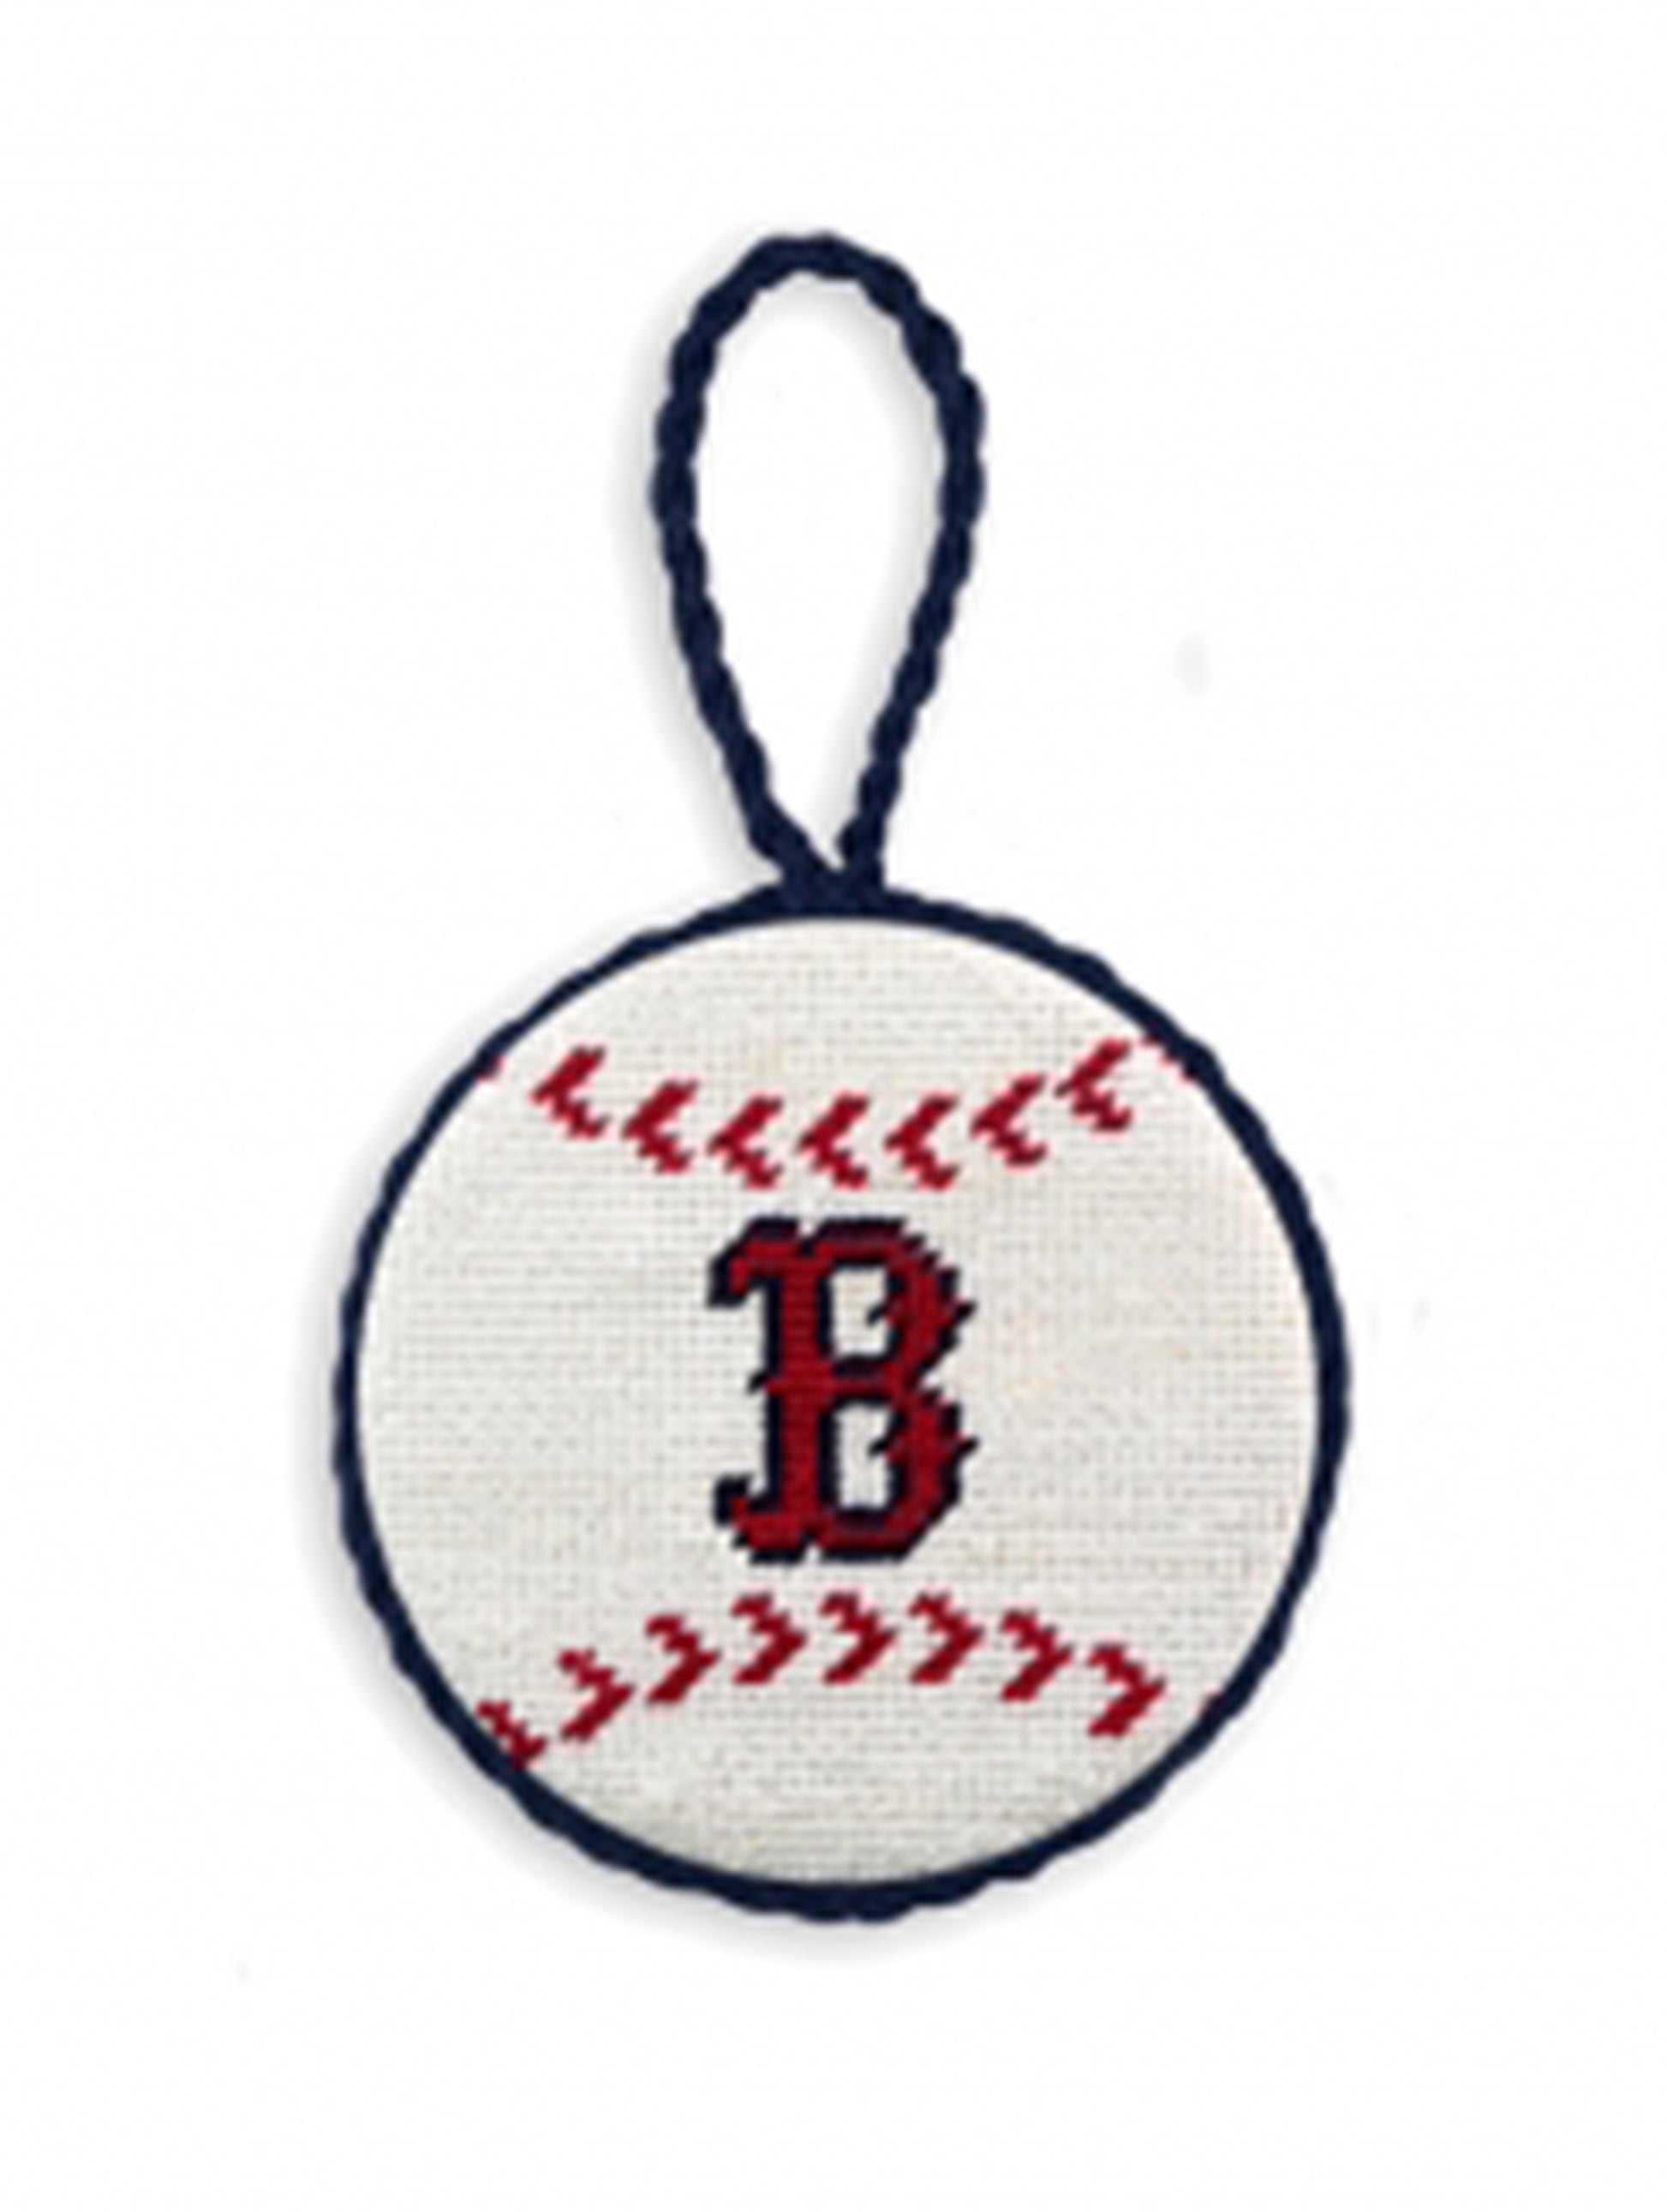 Smathers & Branson Red Sox Needlepoint Ornament Weston Table